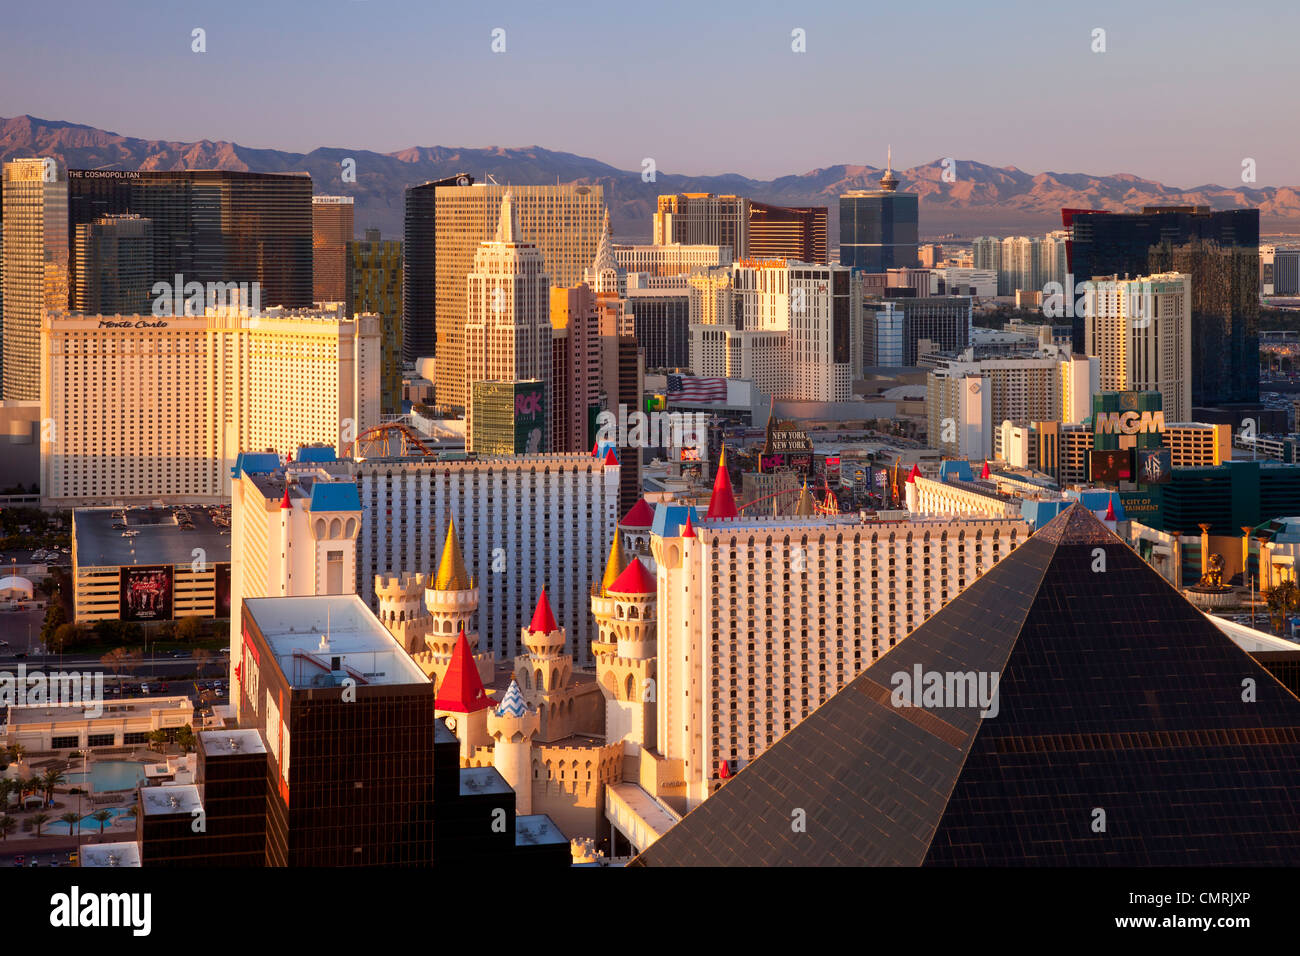 Las Vegas City Skyline At Sunset Background, Pictures Of Nevada